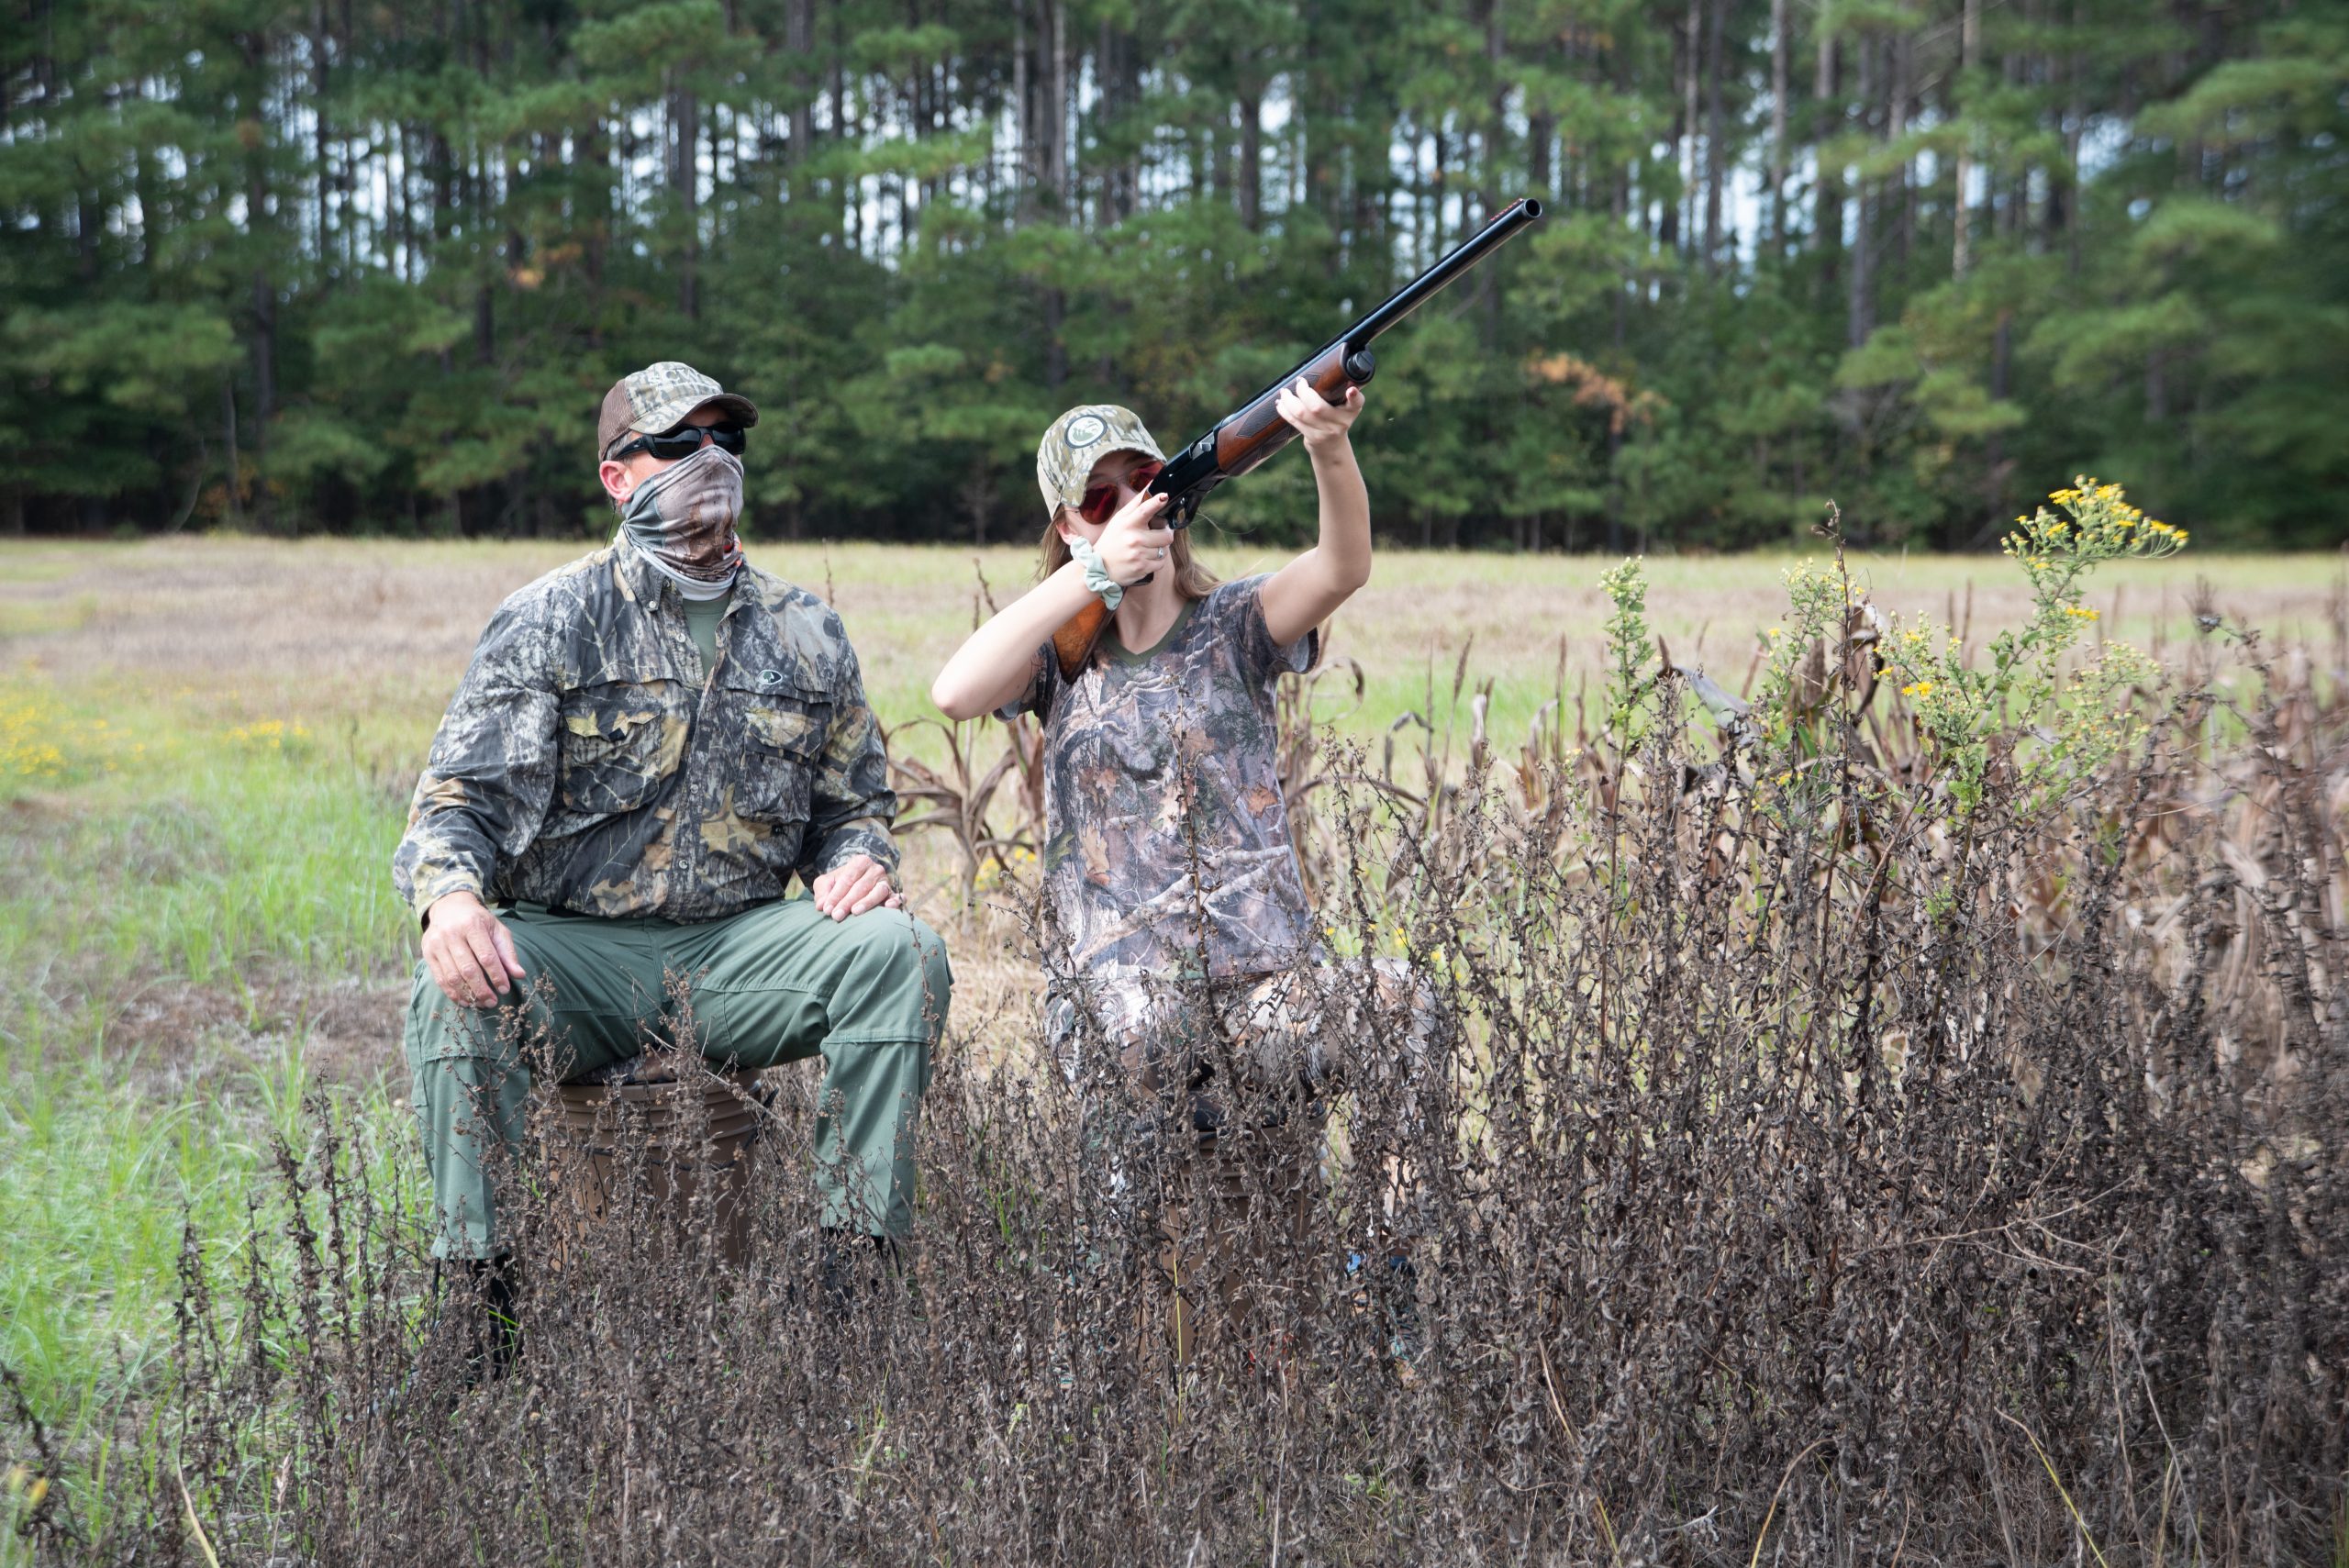 SCDNR Law Enforcement Officer FSgt Ken Cope oversees the TOMO program for South Carolina and enjoys mentoring eager young hunters, like siblings Alexis and Adam Zamolsky. Gun safety, shooting skill, and respect for wildlife are among the many things he teaches about being a responsible outdoorsman. 